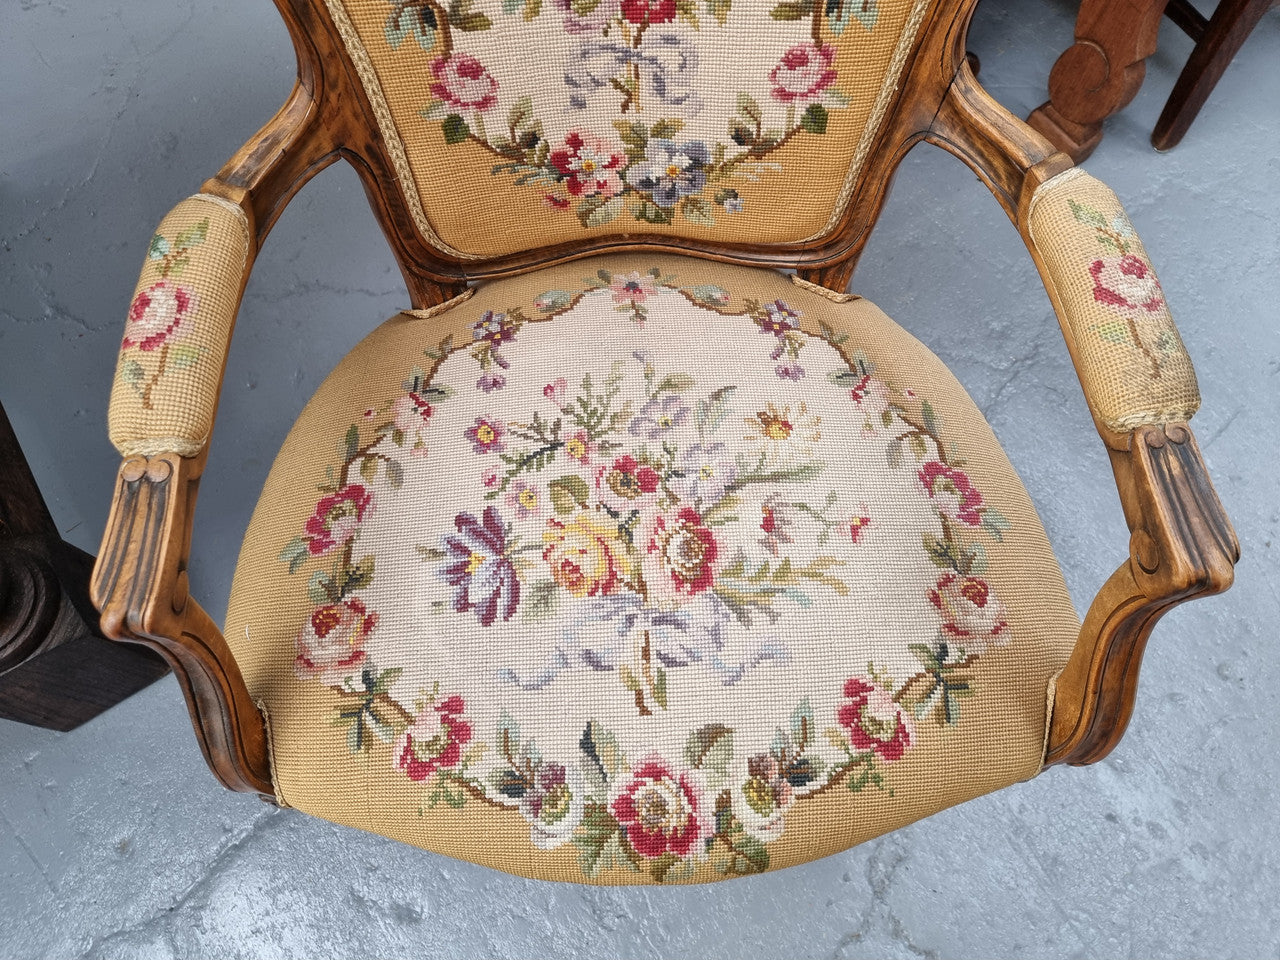 Louis XV style Walnut and tapestry armchair. Very comfortable to sit in and tapestry is in good original used condition.